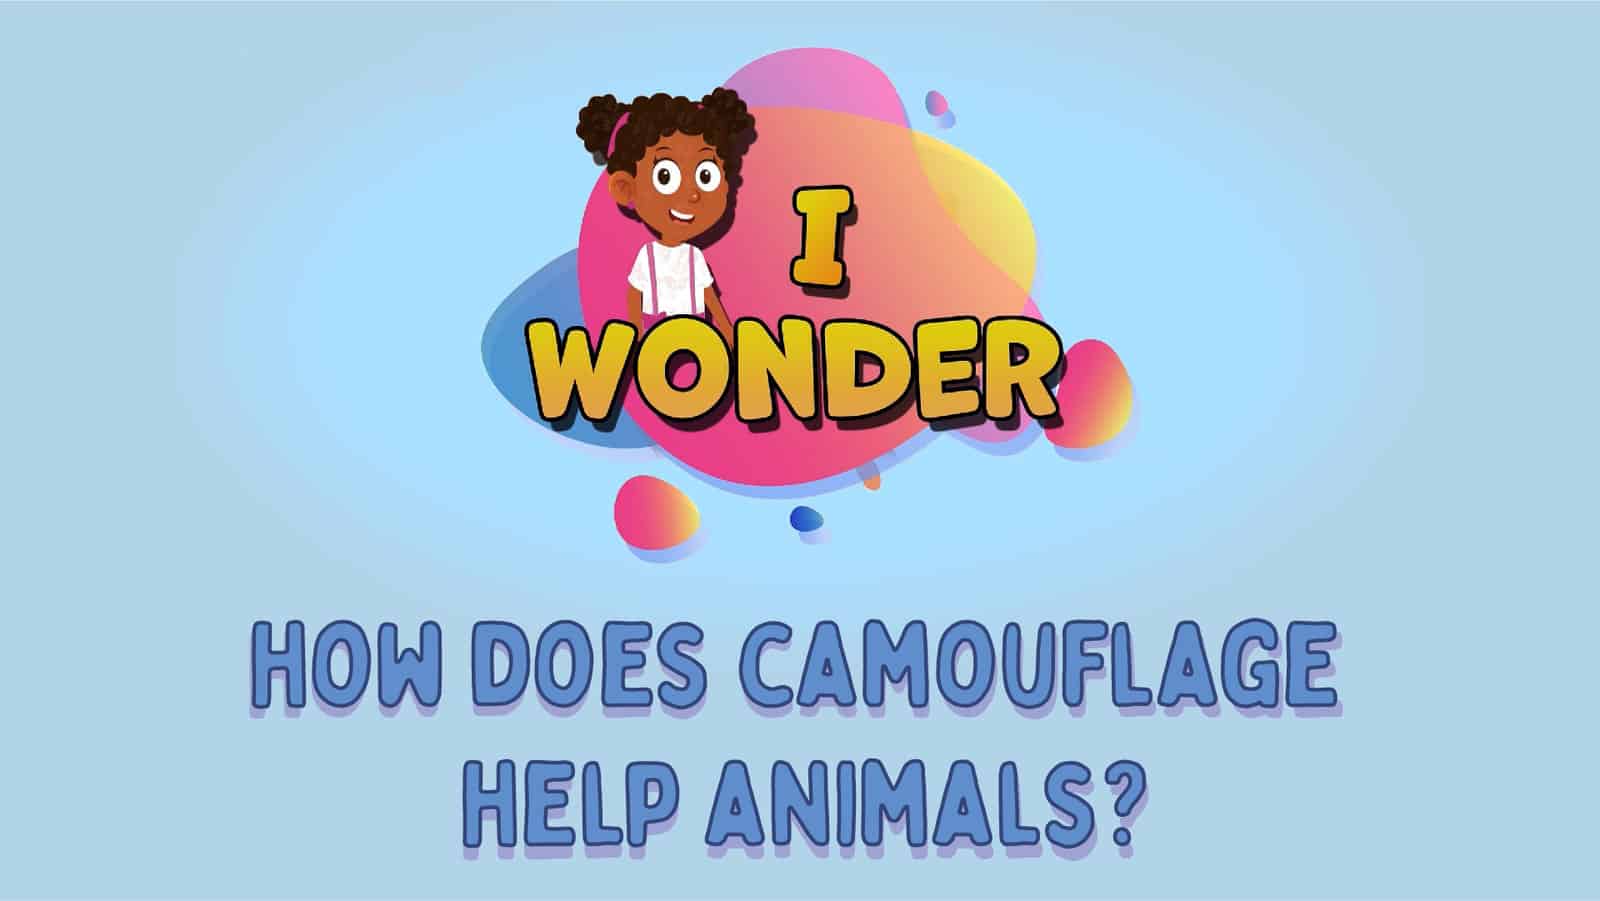 How Does Camouflage Help Animals?